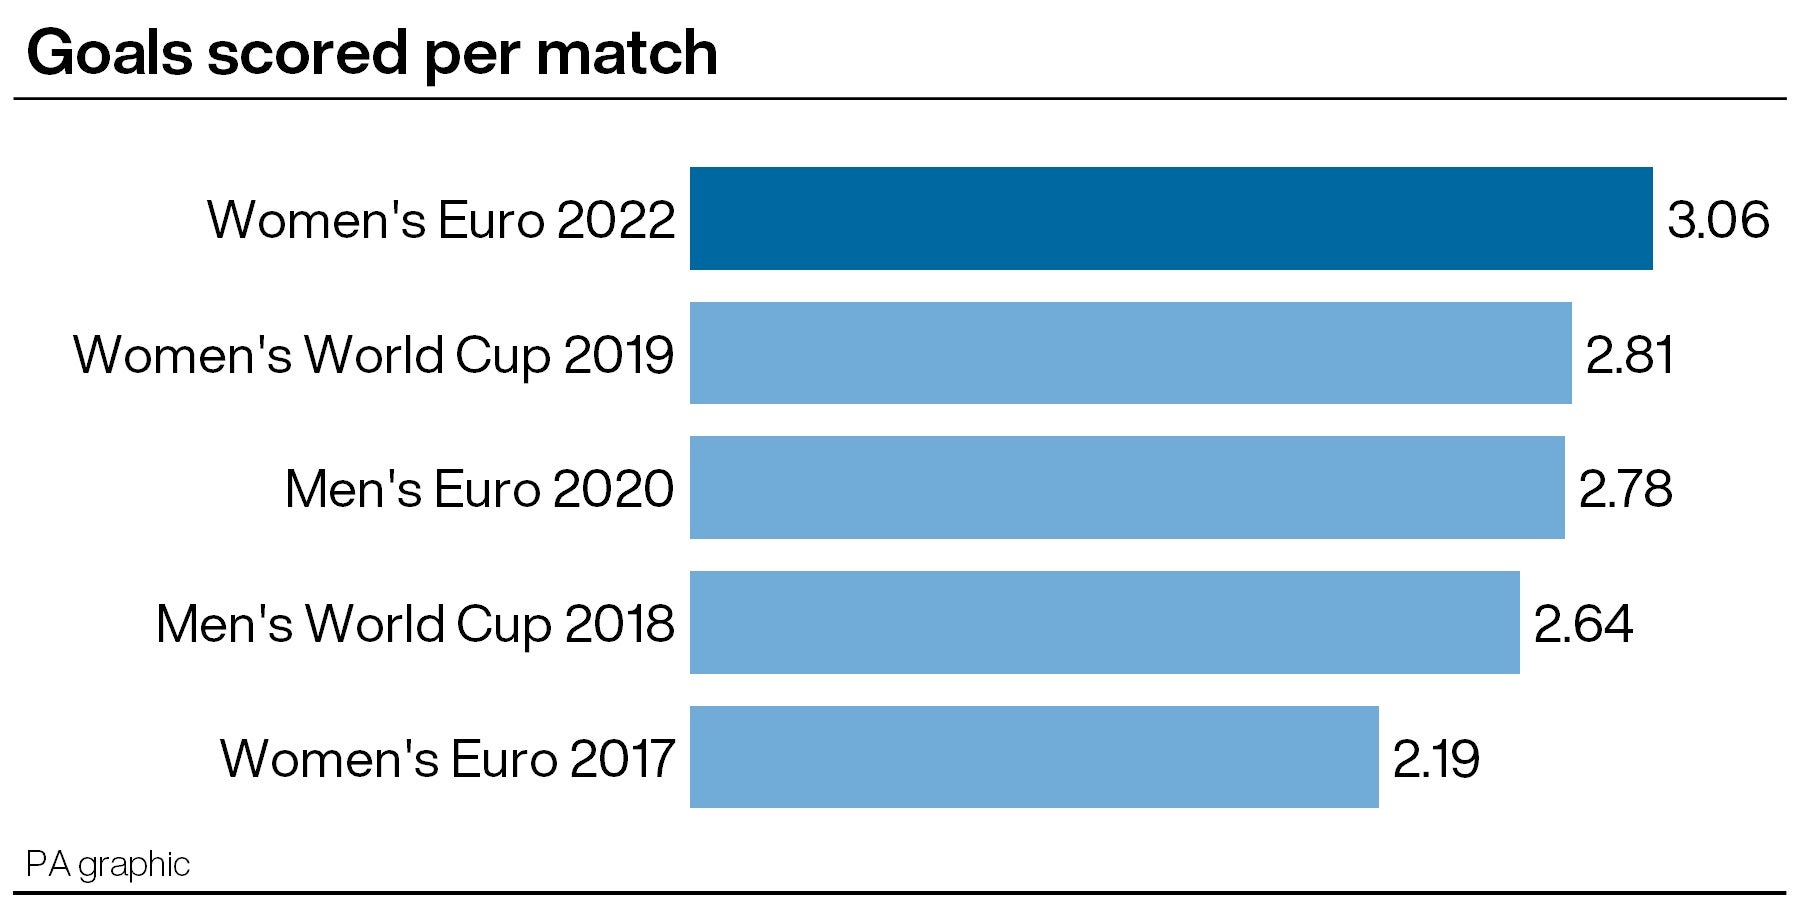 Euro 2022 was the highest-scoring of the most recent round of international tournaments (PA graphic)